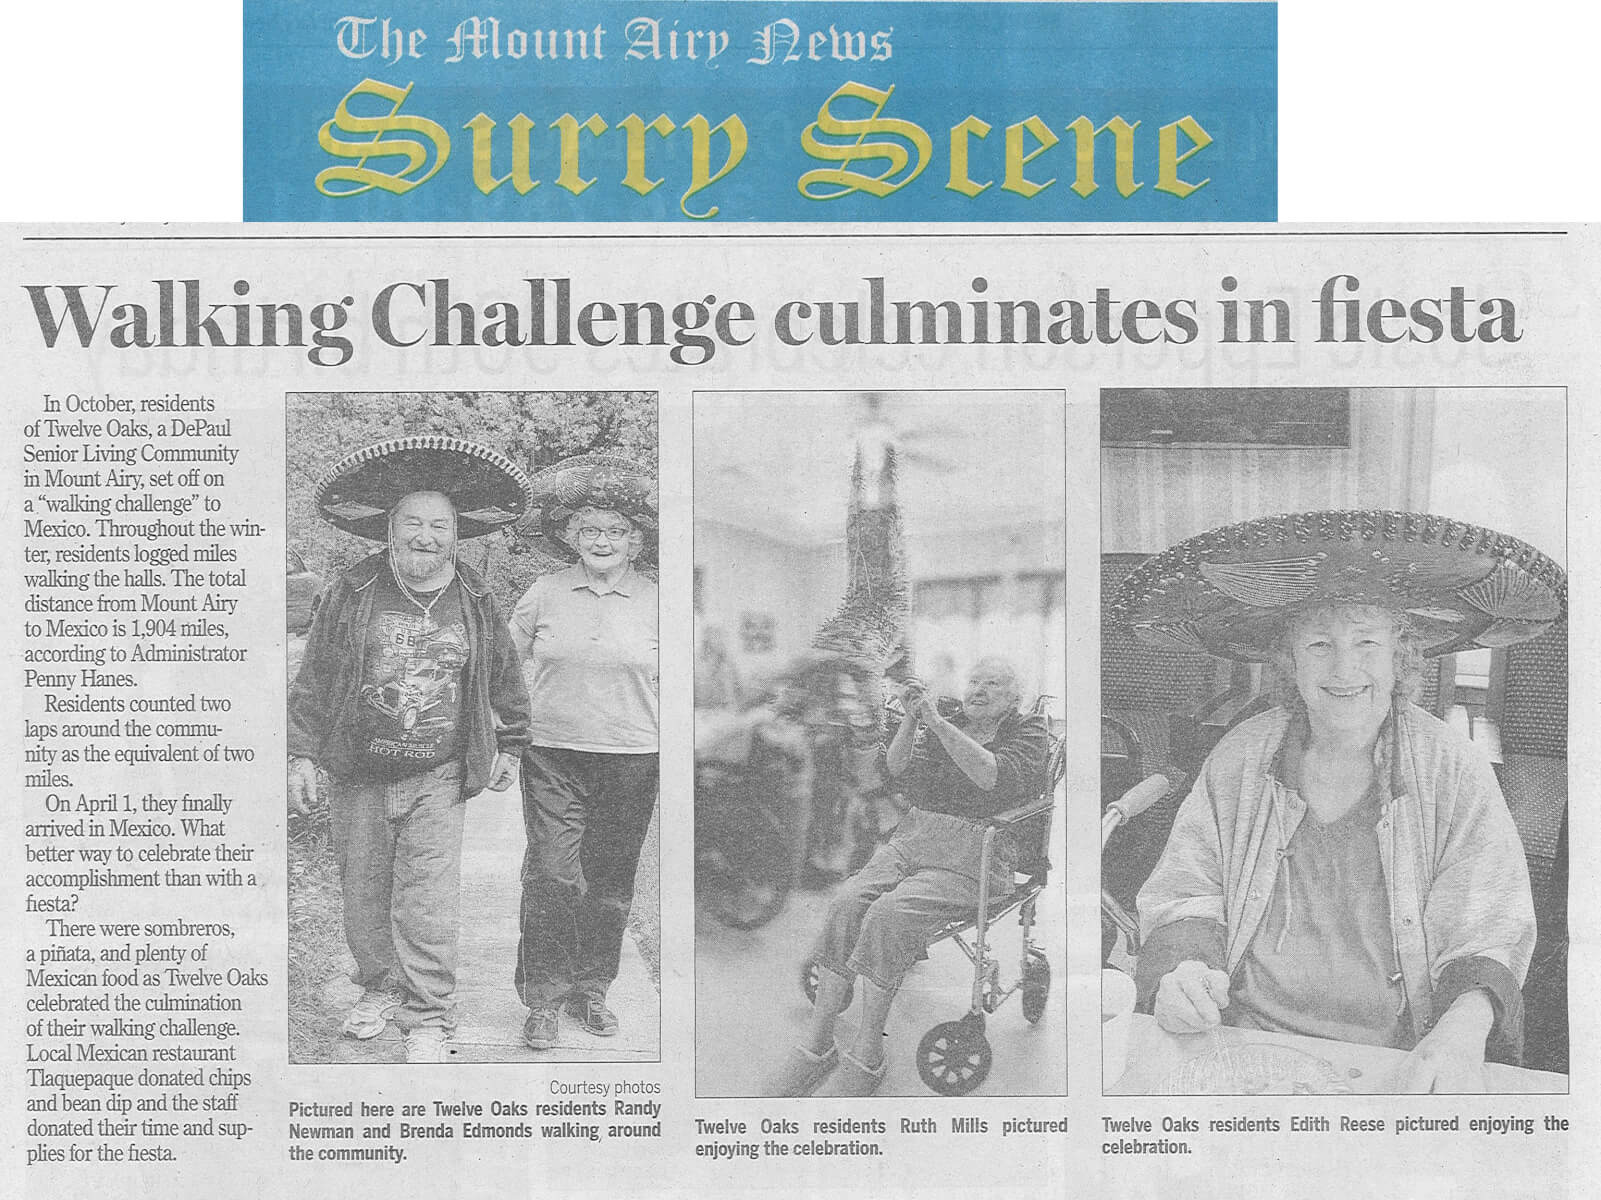 Twelve Oaks Walking Challenge turns into a party, article in the Mount Airy News May 19, 2016